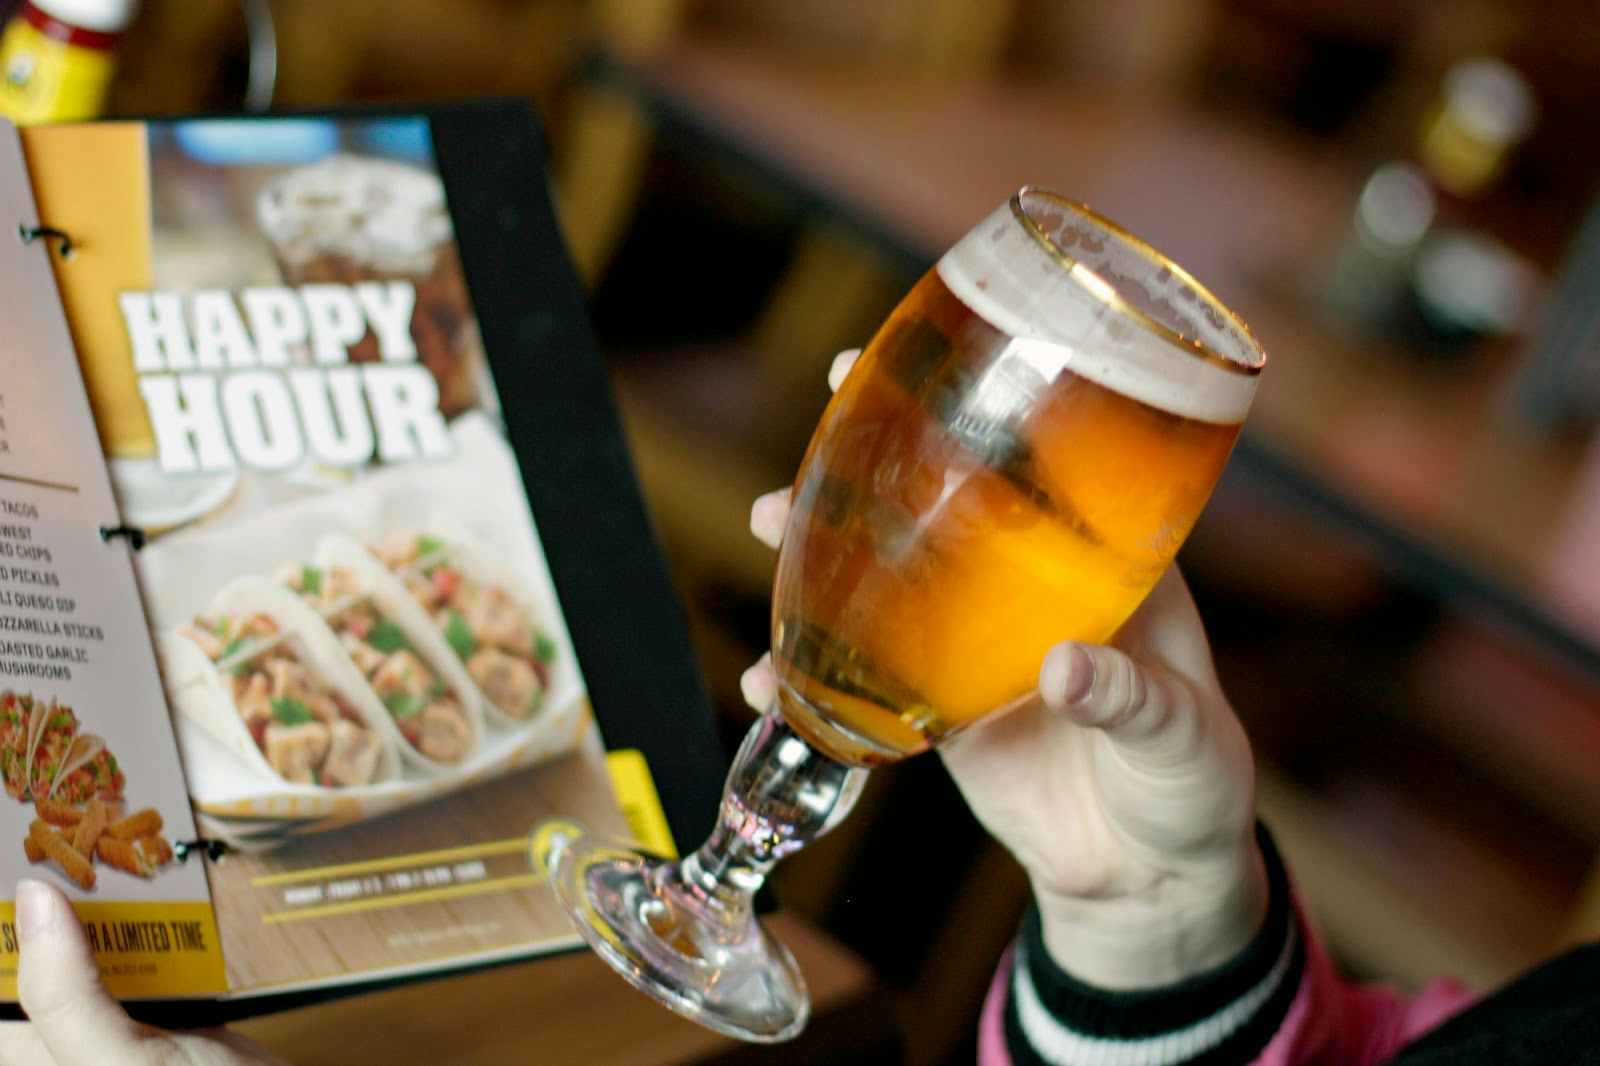 A hand holding a glass of beer with a Happy Hour menu in the background.